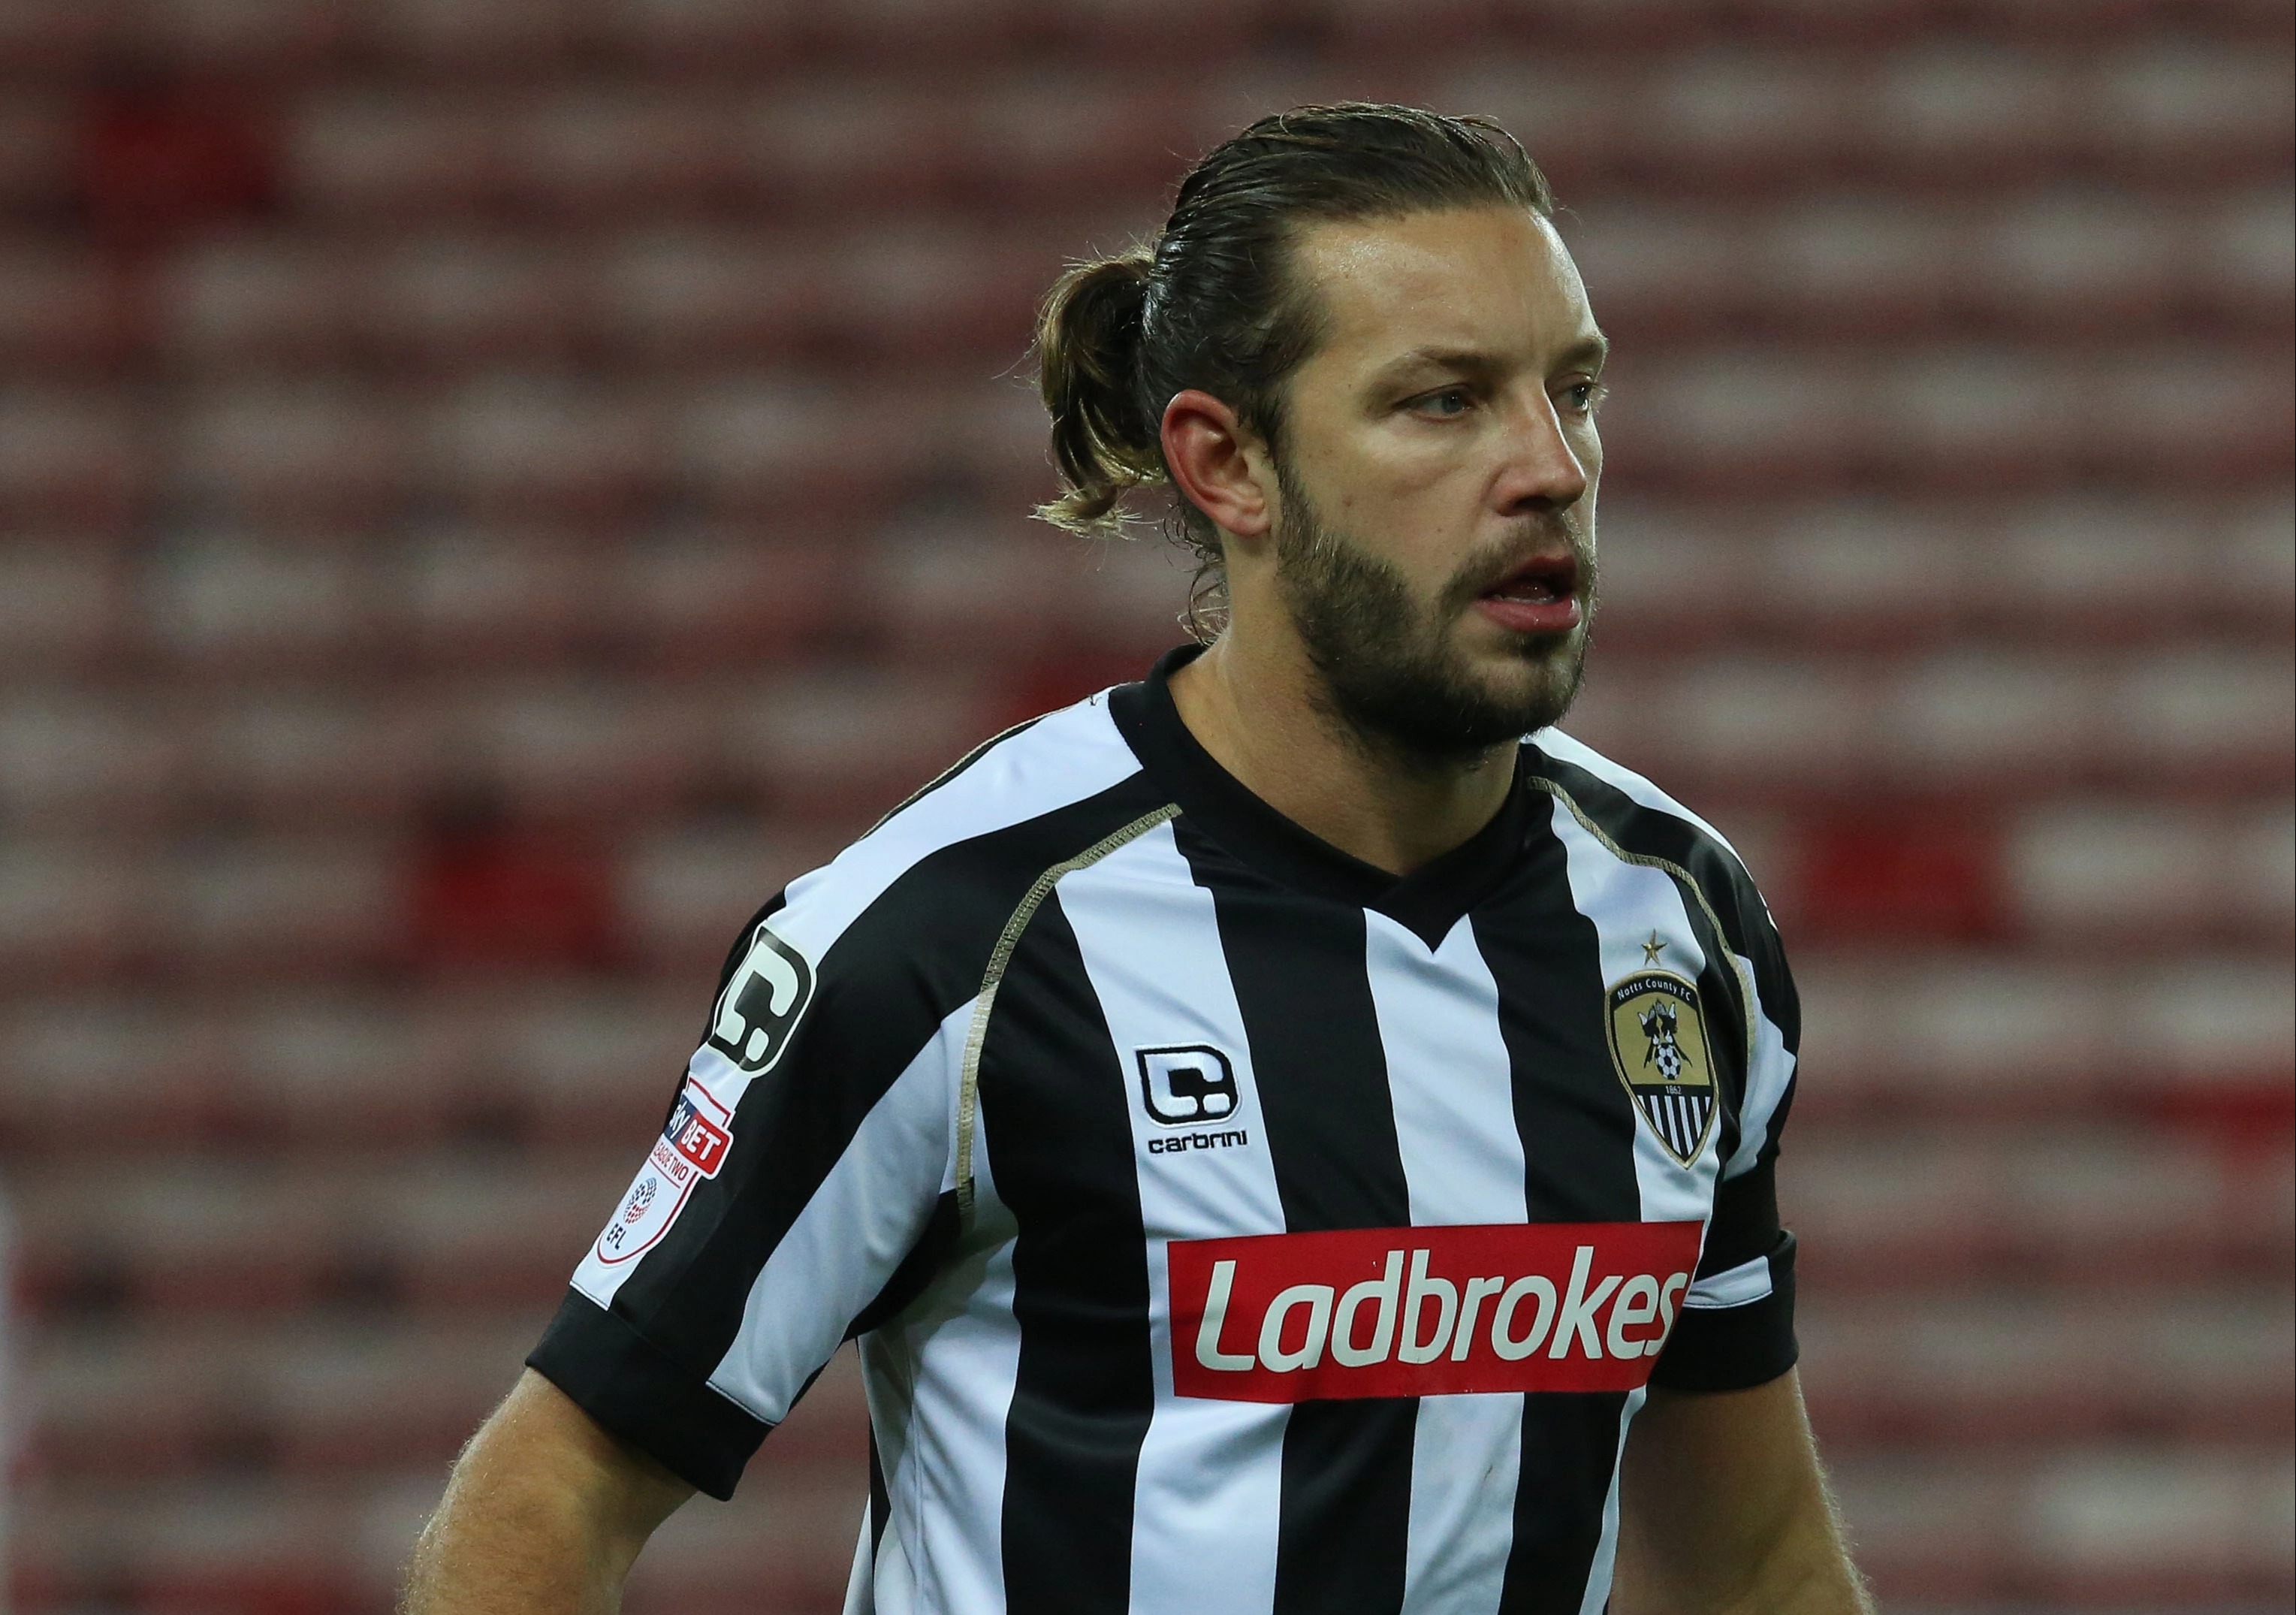 Smith grew his hair and beard out by the time he played for Notts County